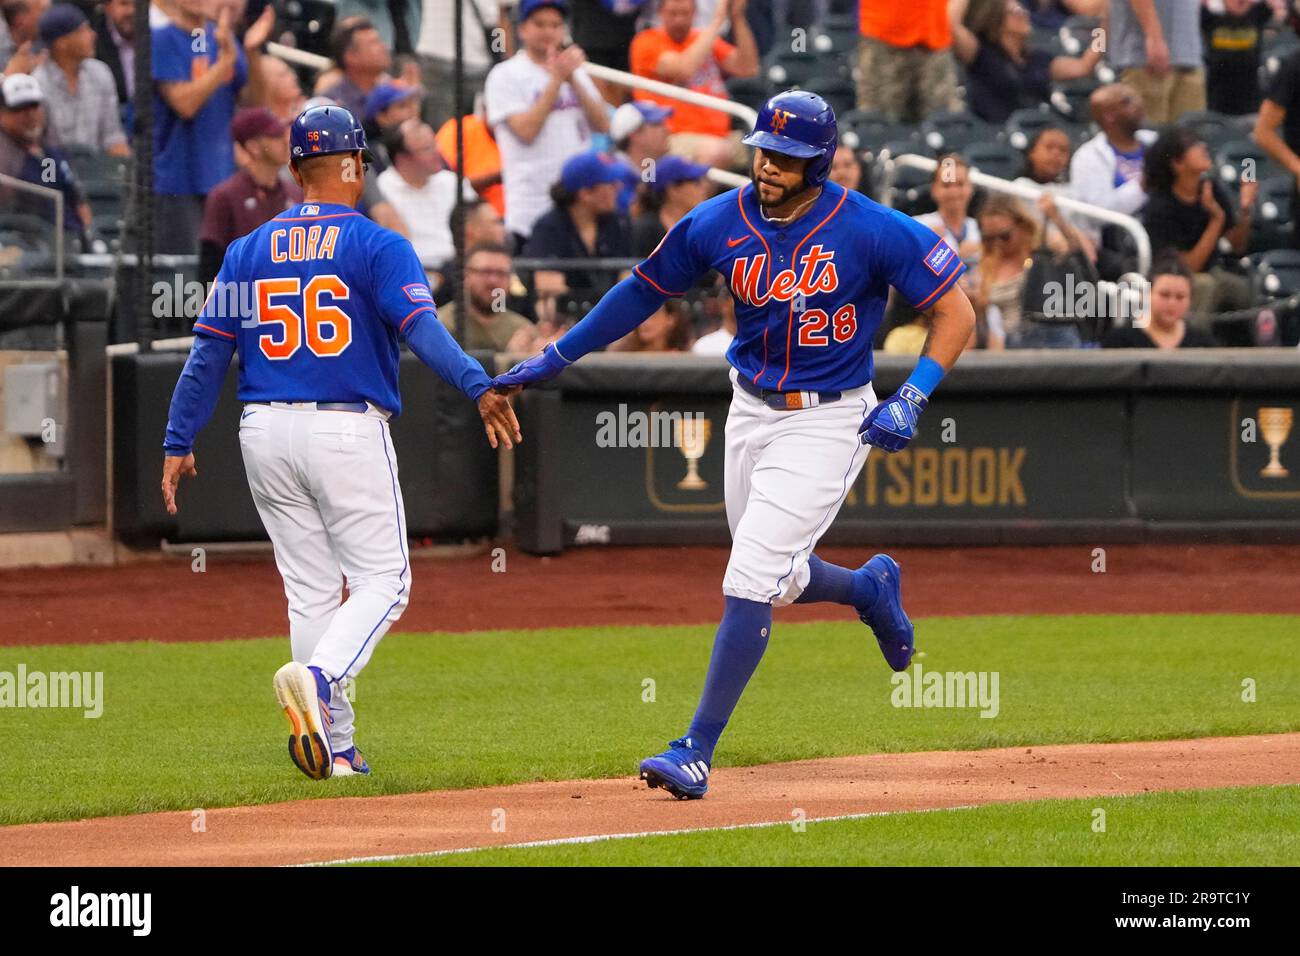 FLUSHING, NY - JUNE 28: New York Mets Third Base Coach Joey Cora (56)  congratulates New York Mets Left Fielder 5Tommy Pham (28) for hitting a  home run during the second inning